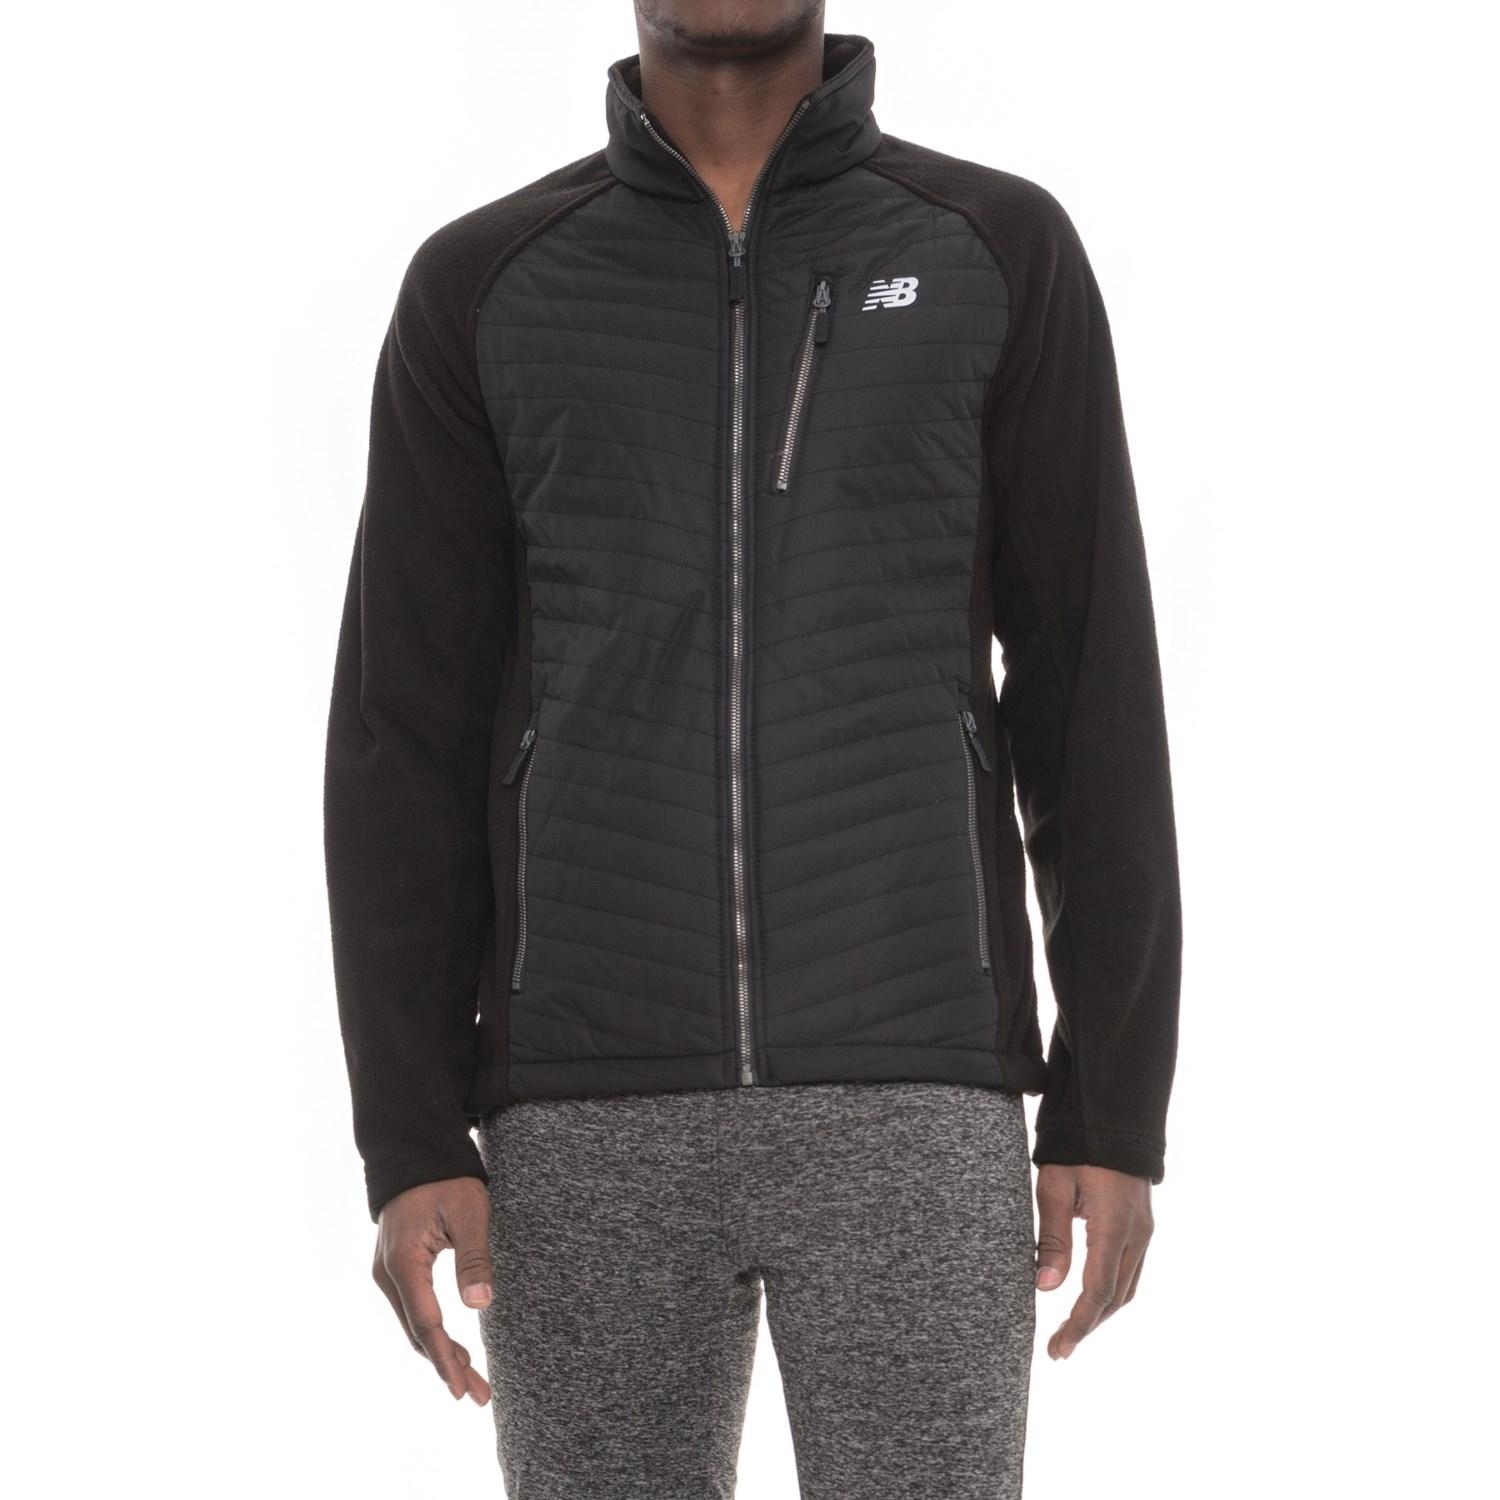 New Balance Polar Fleece Quilted Front Jacket in Black for Men - Lyst